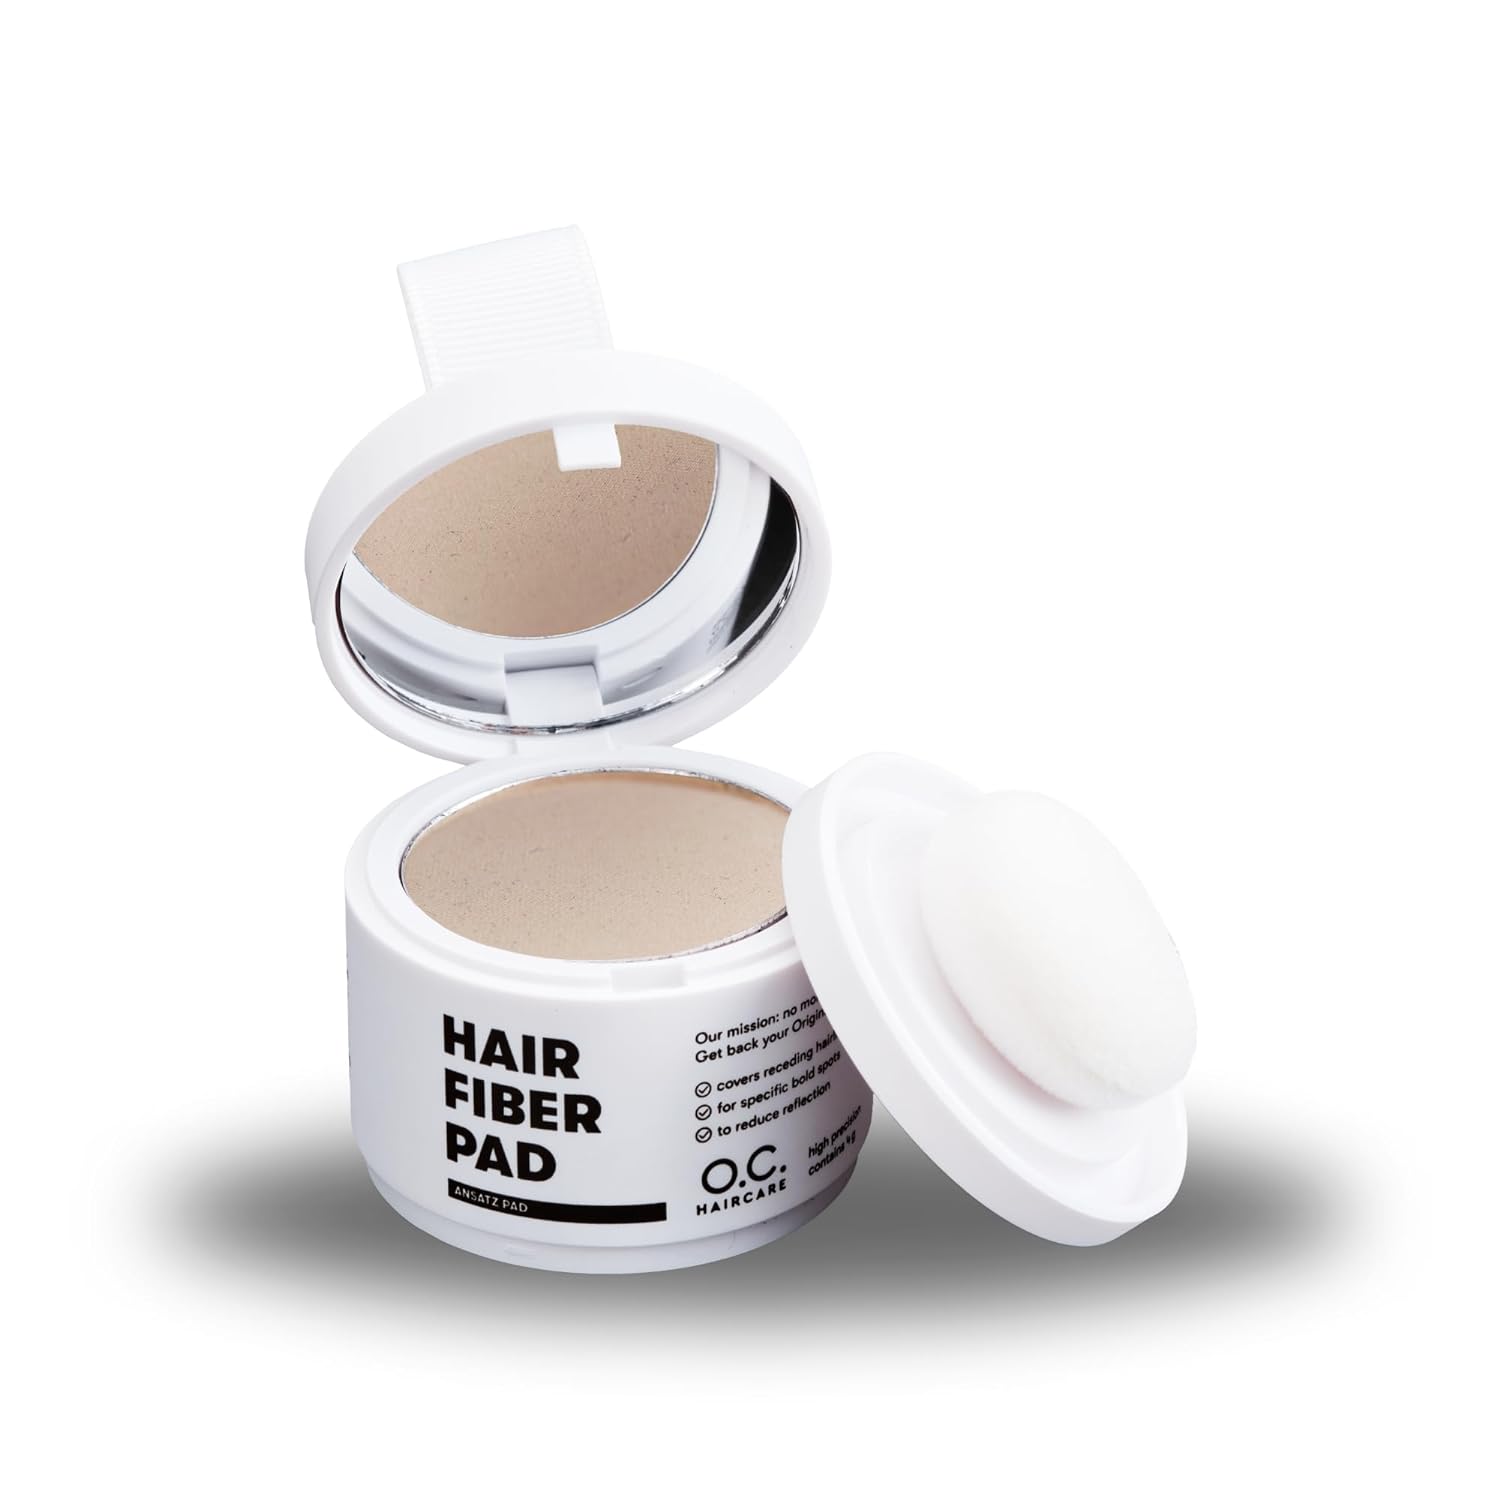 O.C. HAIRCARE Roots Powder for Thickening Hair - for Secret Corners, Parting and Hairline - Recommended by Leading Salons - 8 Colours - Resistant Hair Powder (Light Blonde)